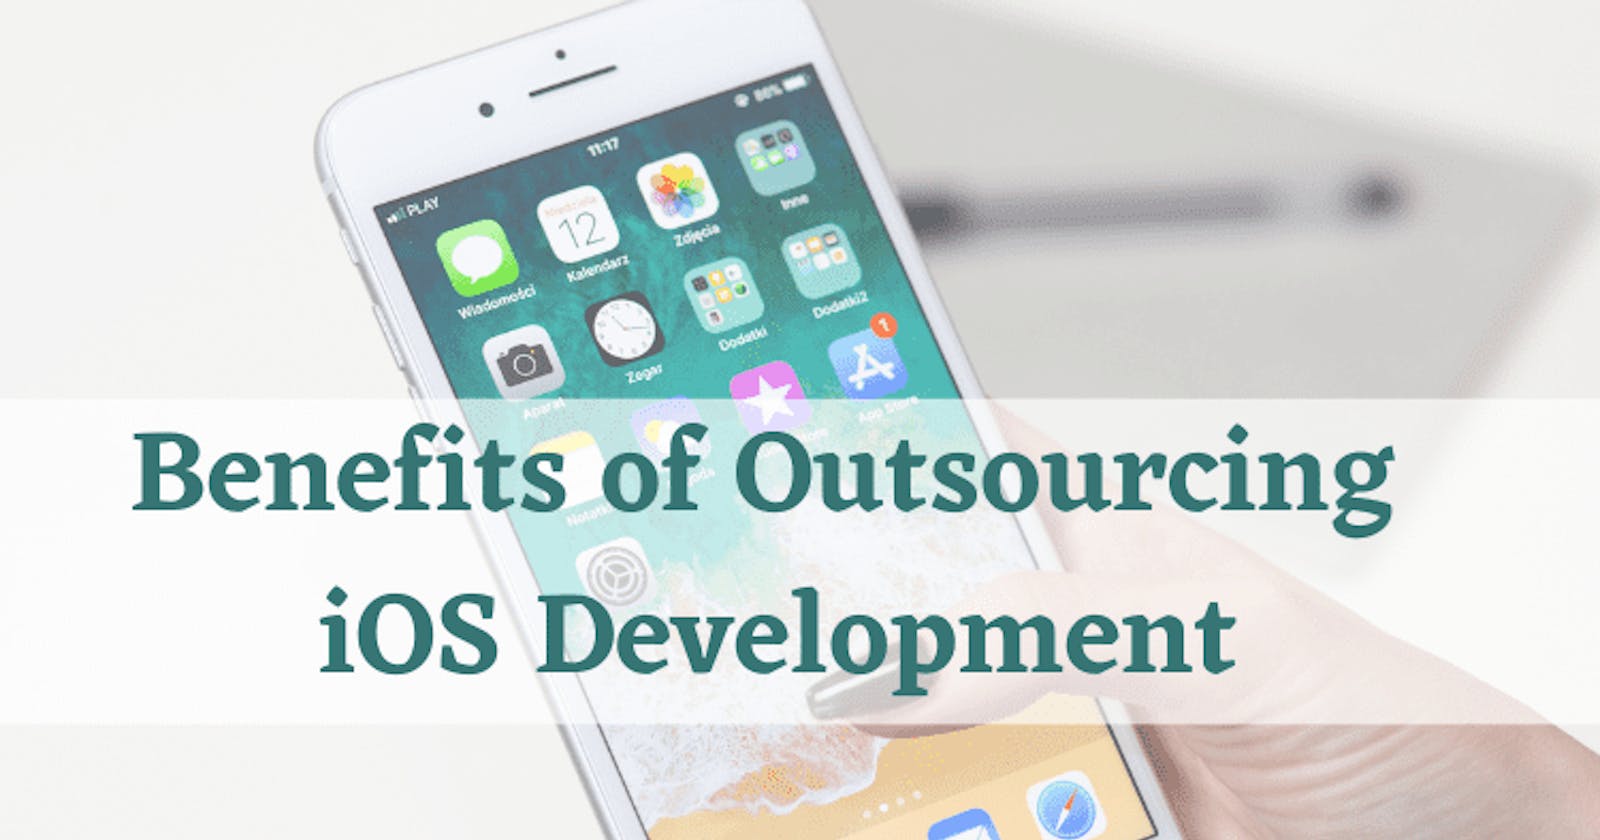 Benefits of Outsourcing iOS Development